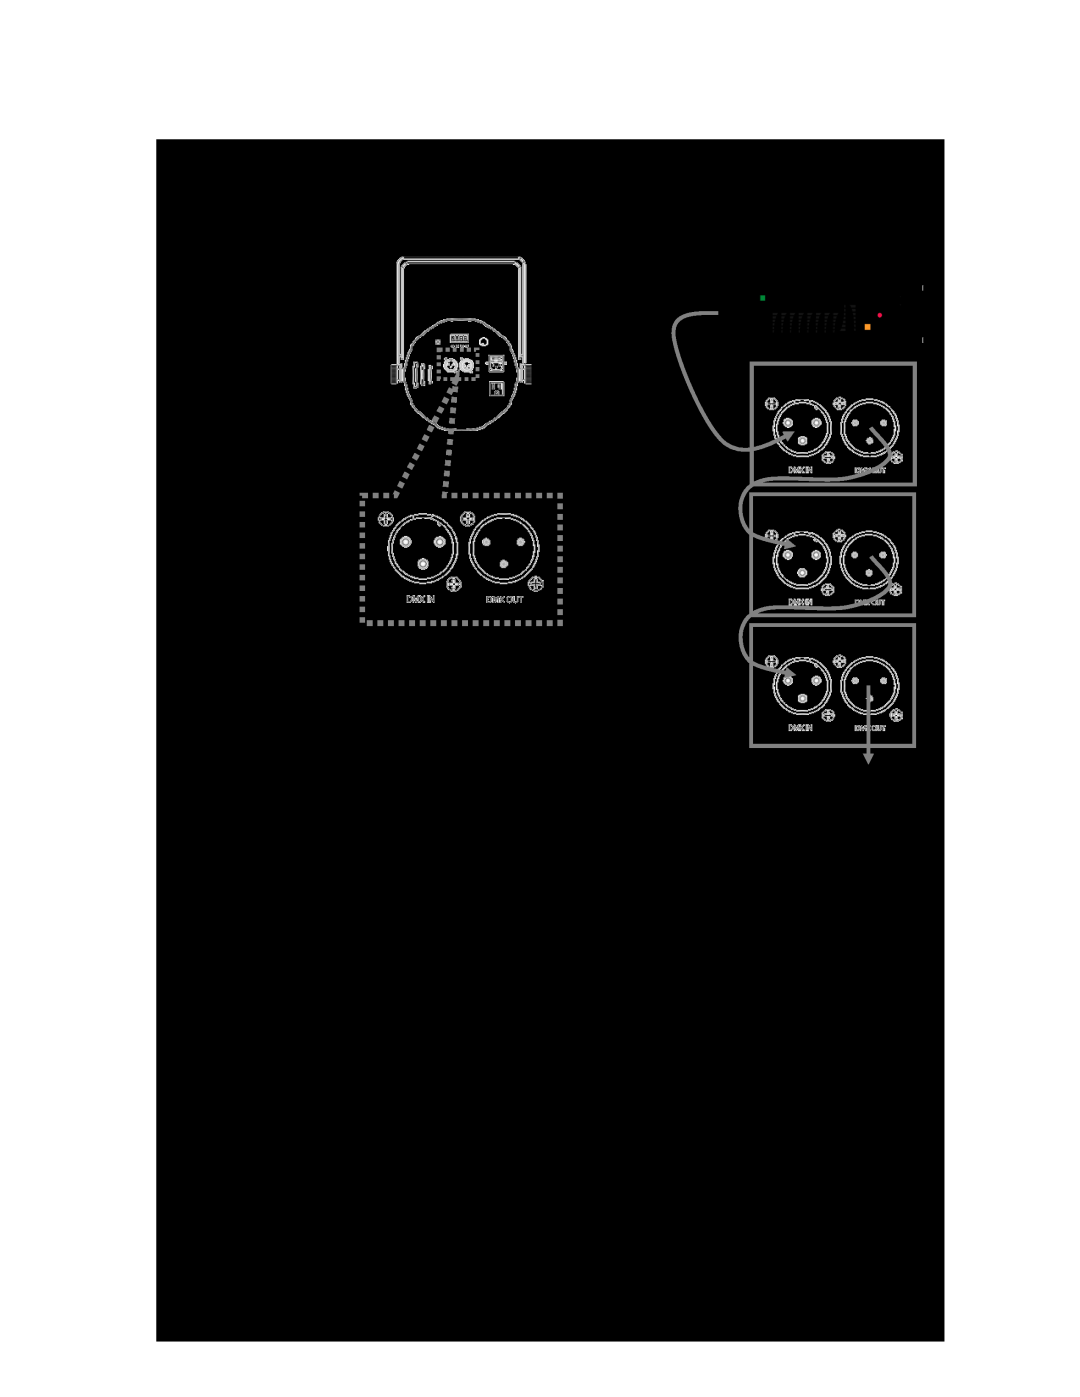 Chauvet 38 user manual Signal Linking, only in DMX operation, Fixture #1 Fixture #2 Fixture #3 